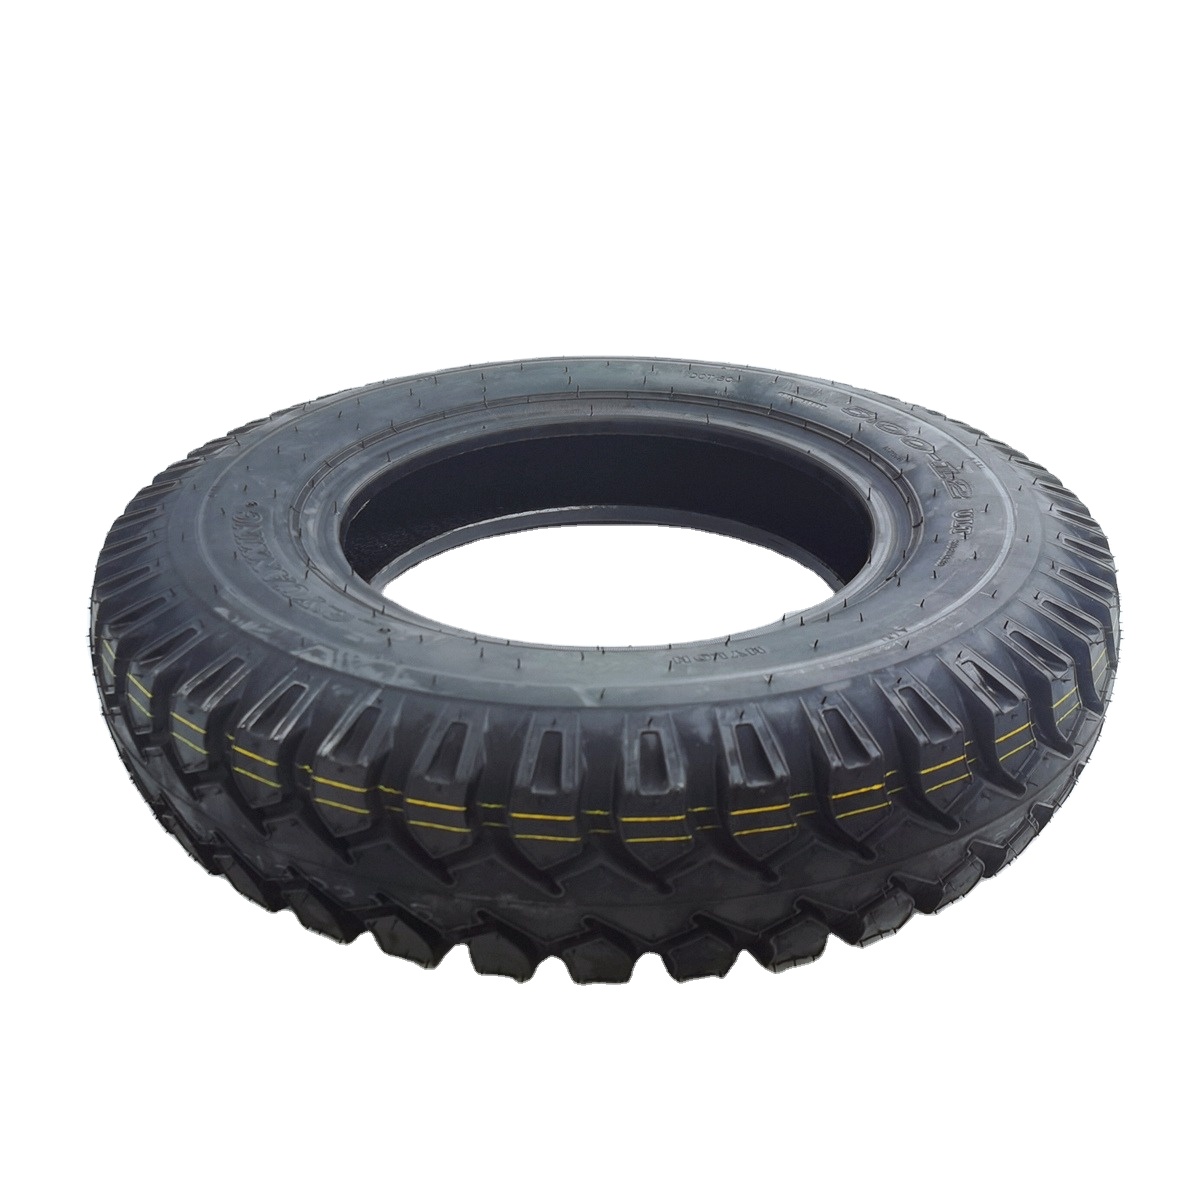 Factory Direct Color Motorcycle Tires for Sale 4 hole 5.0-12 tire for Sale Tyre Product Casing Pattern Rubber CCC Origin Type